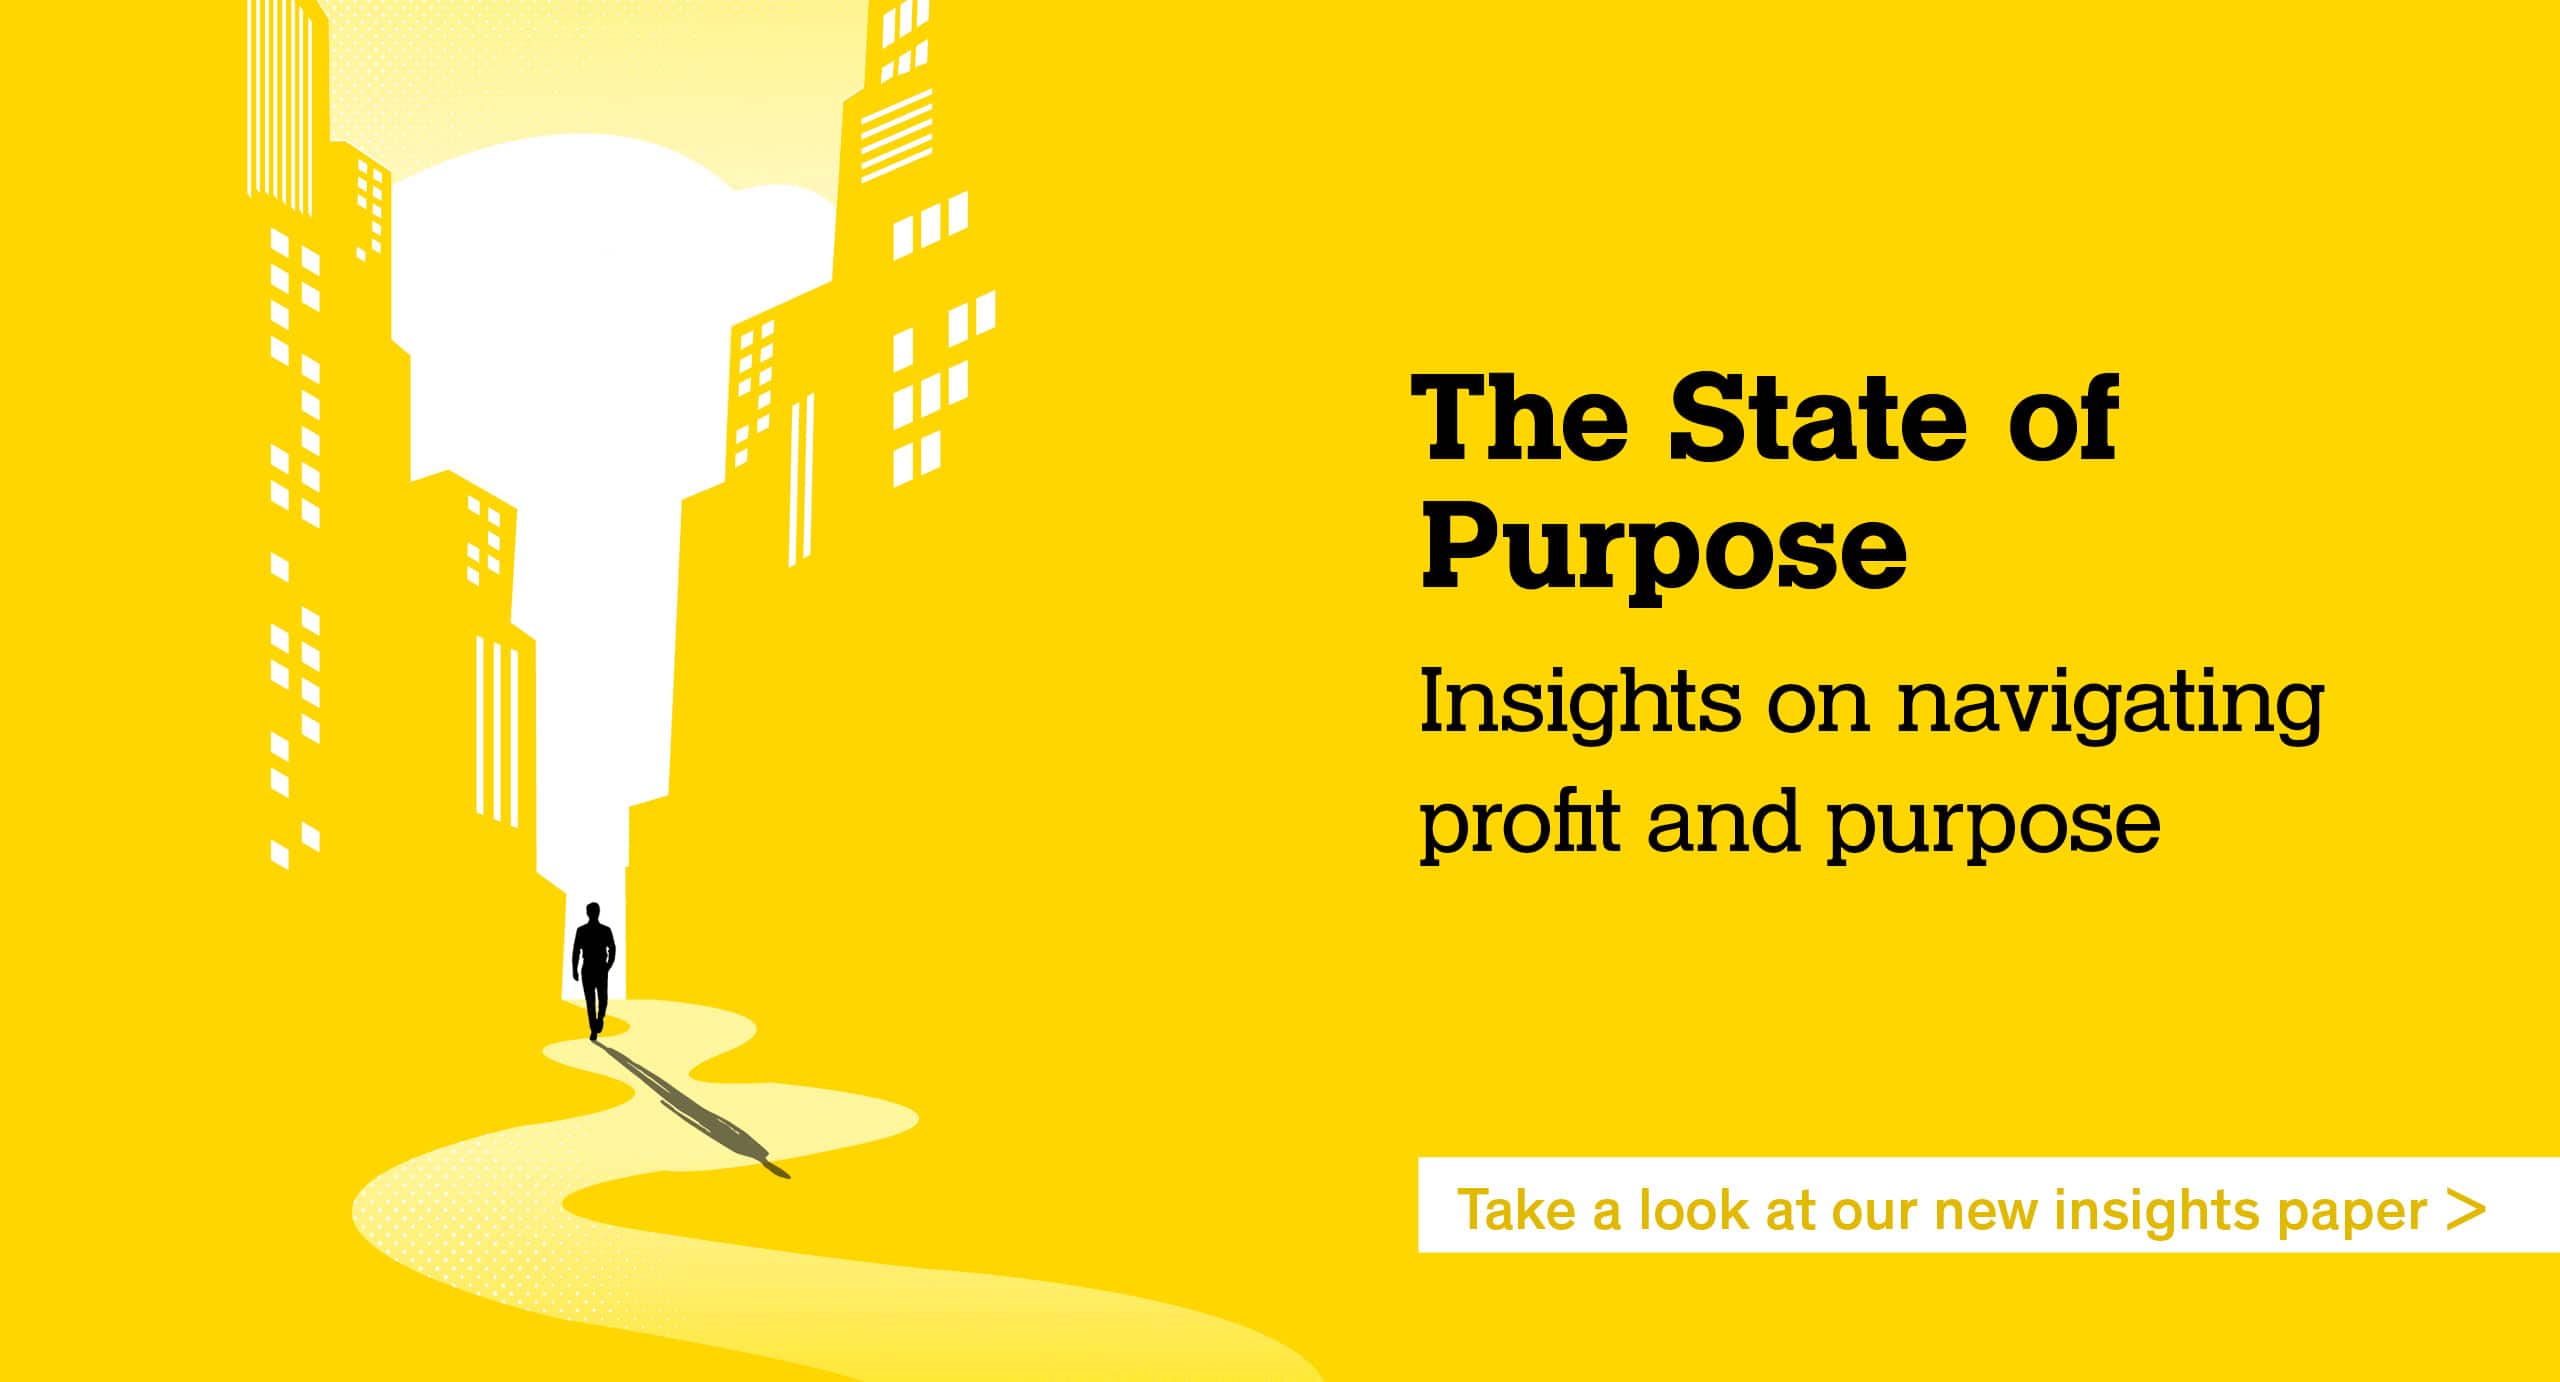 Yellow image with writing The State of Purpose Insights on navigating profit and purpose